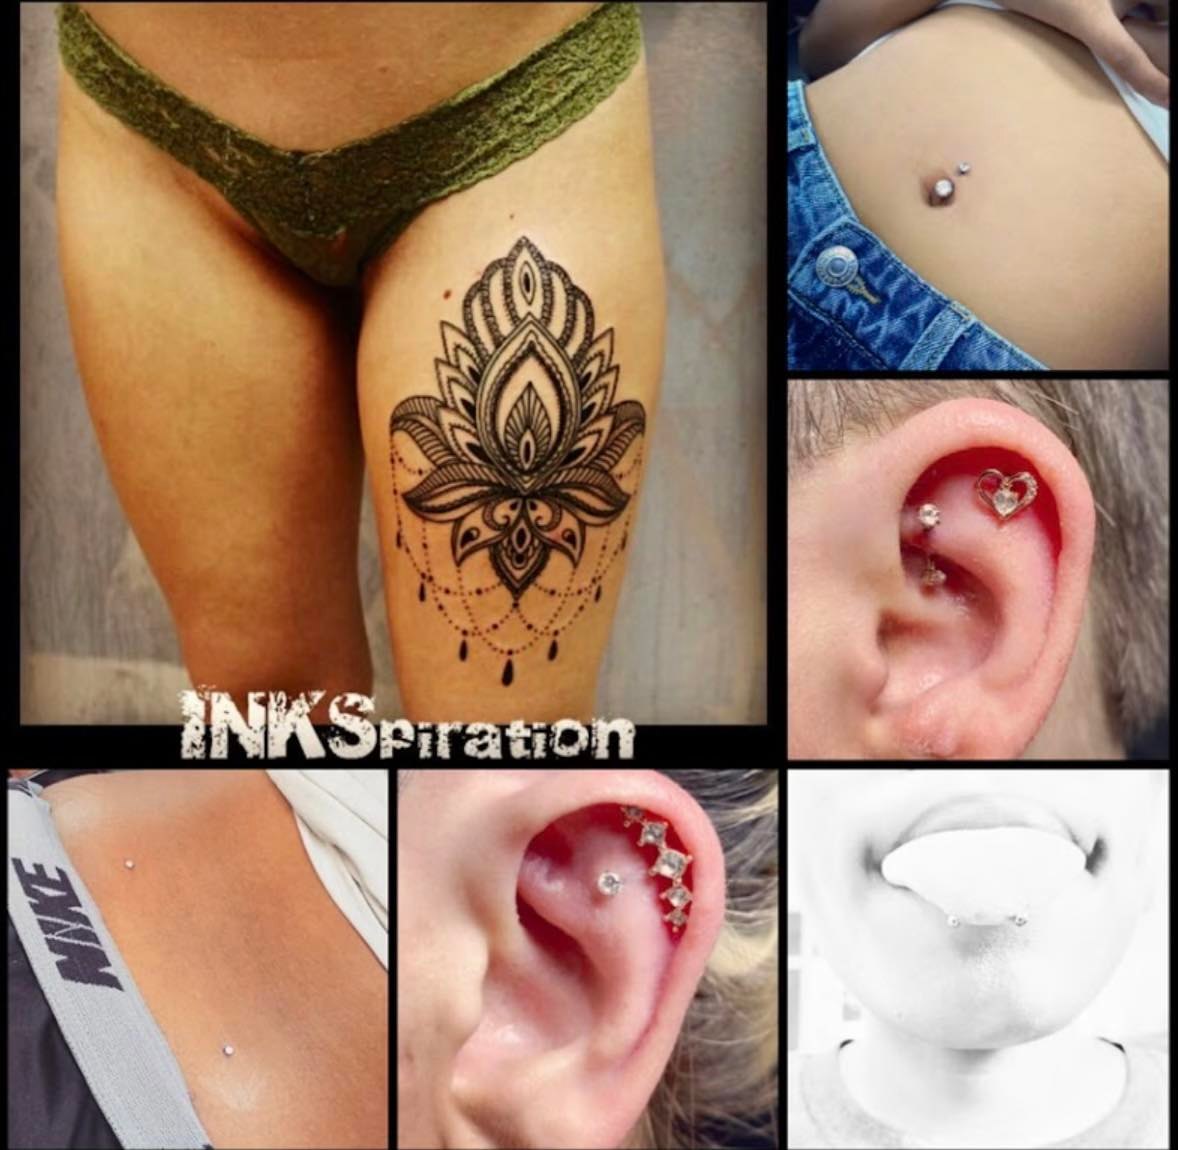 Tattoos, piercings quickly growing in popularity — and acceptance